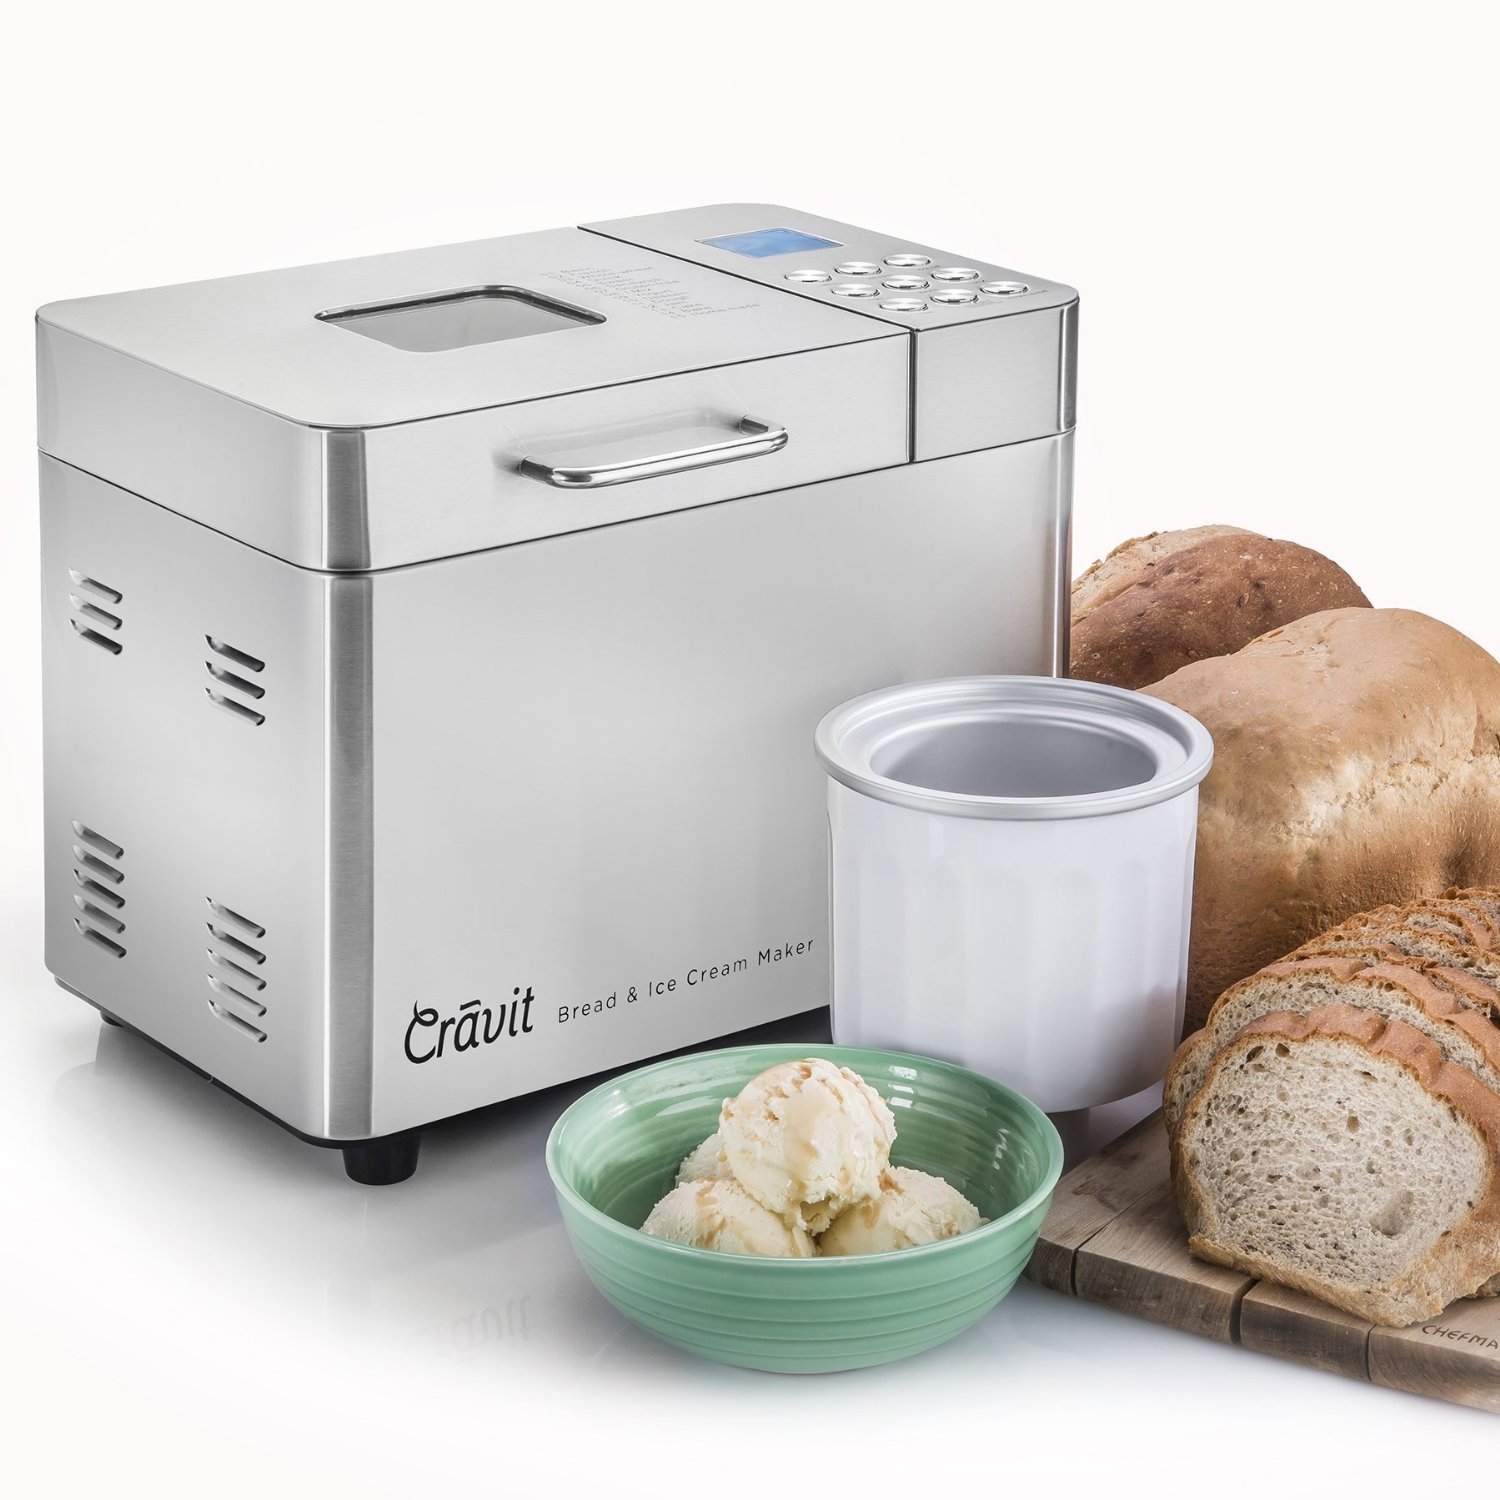 Cravit Bread Maker WITH FREE ICE CREAM MAKER COMBO includes 19 programmable settings AND delicious HOMEMADE Ice Cream Maker! DV-1000 Q'Essenz Inc